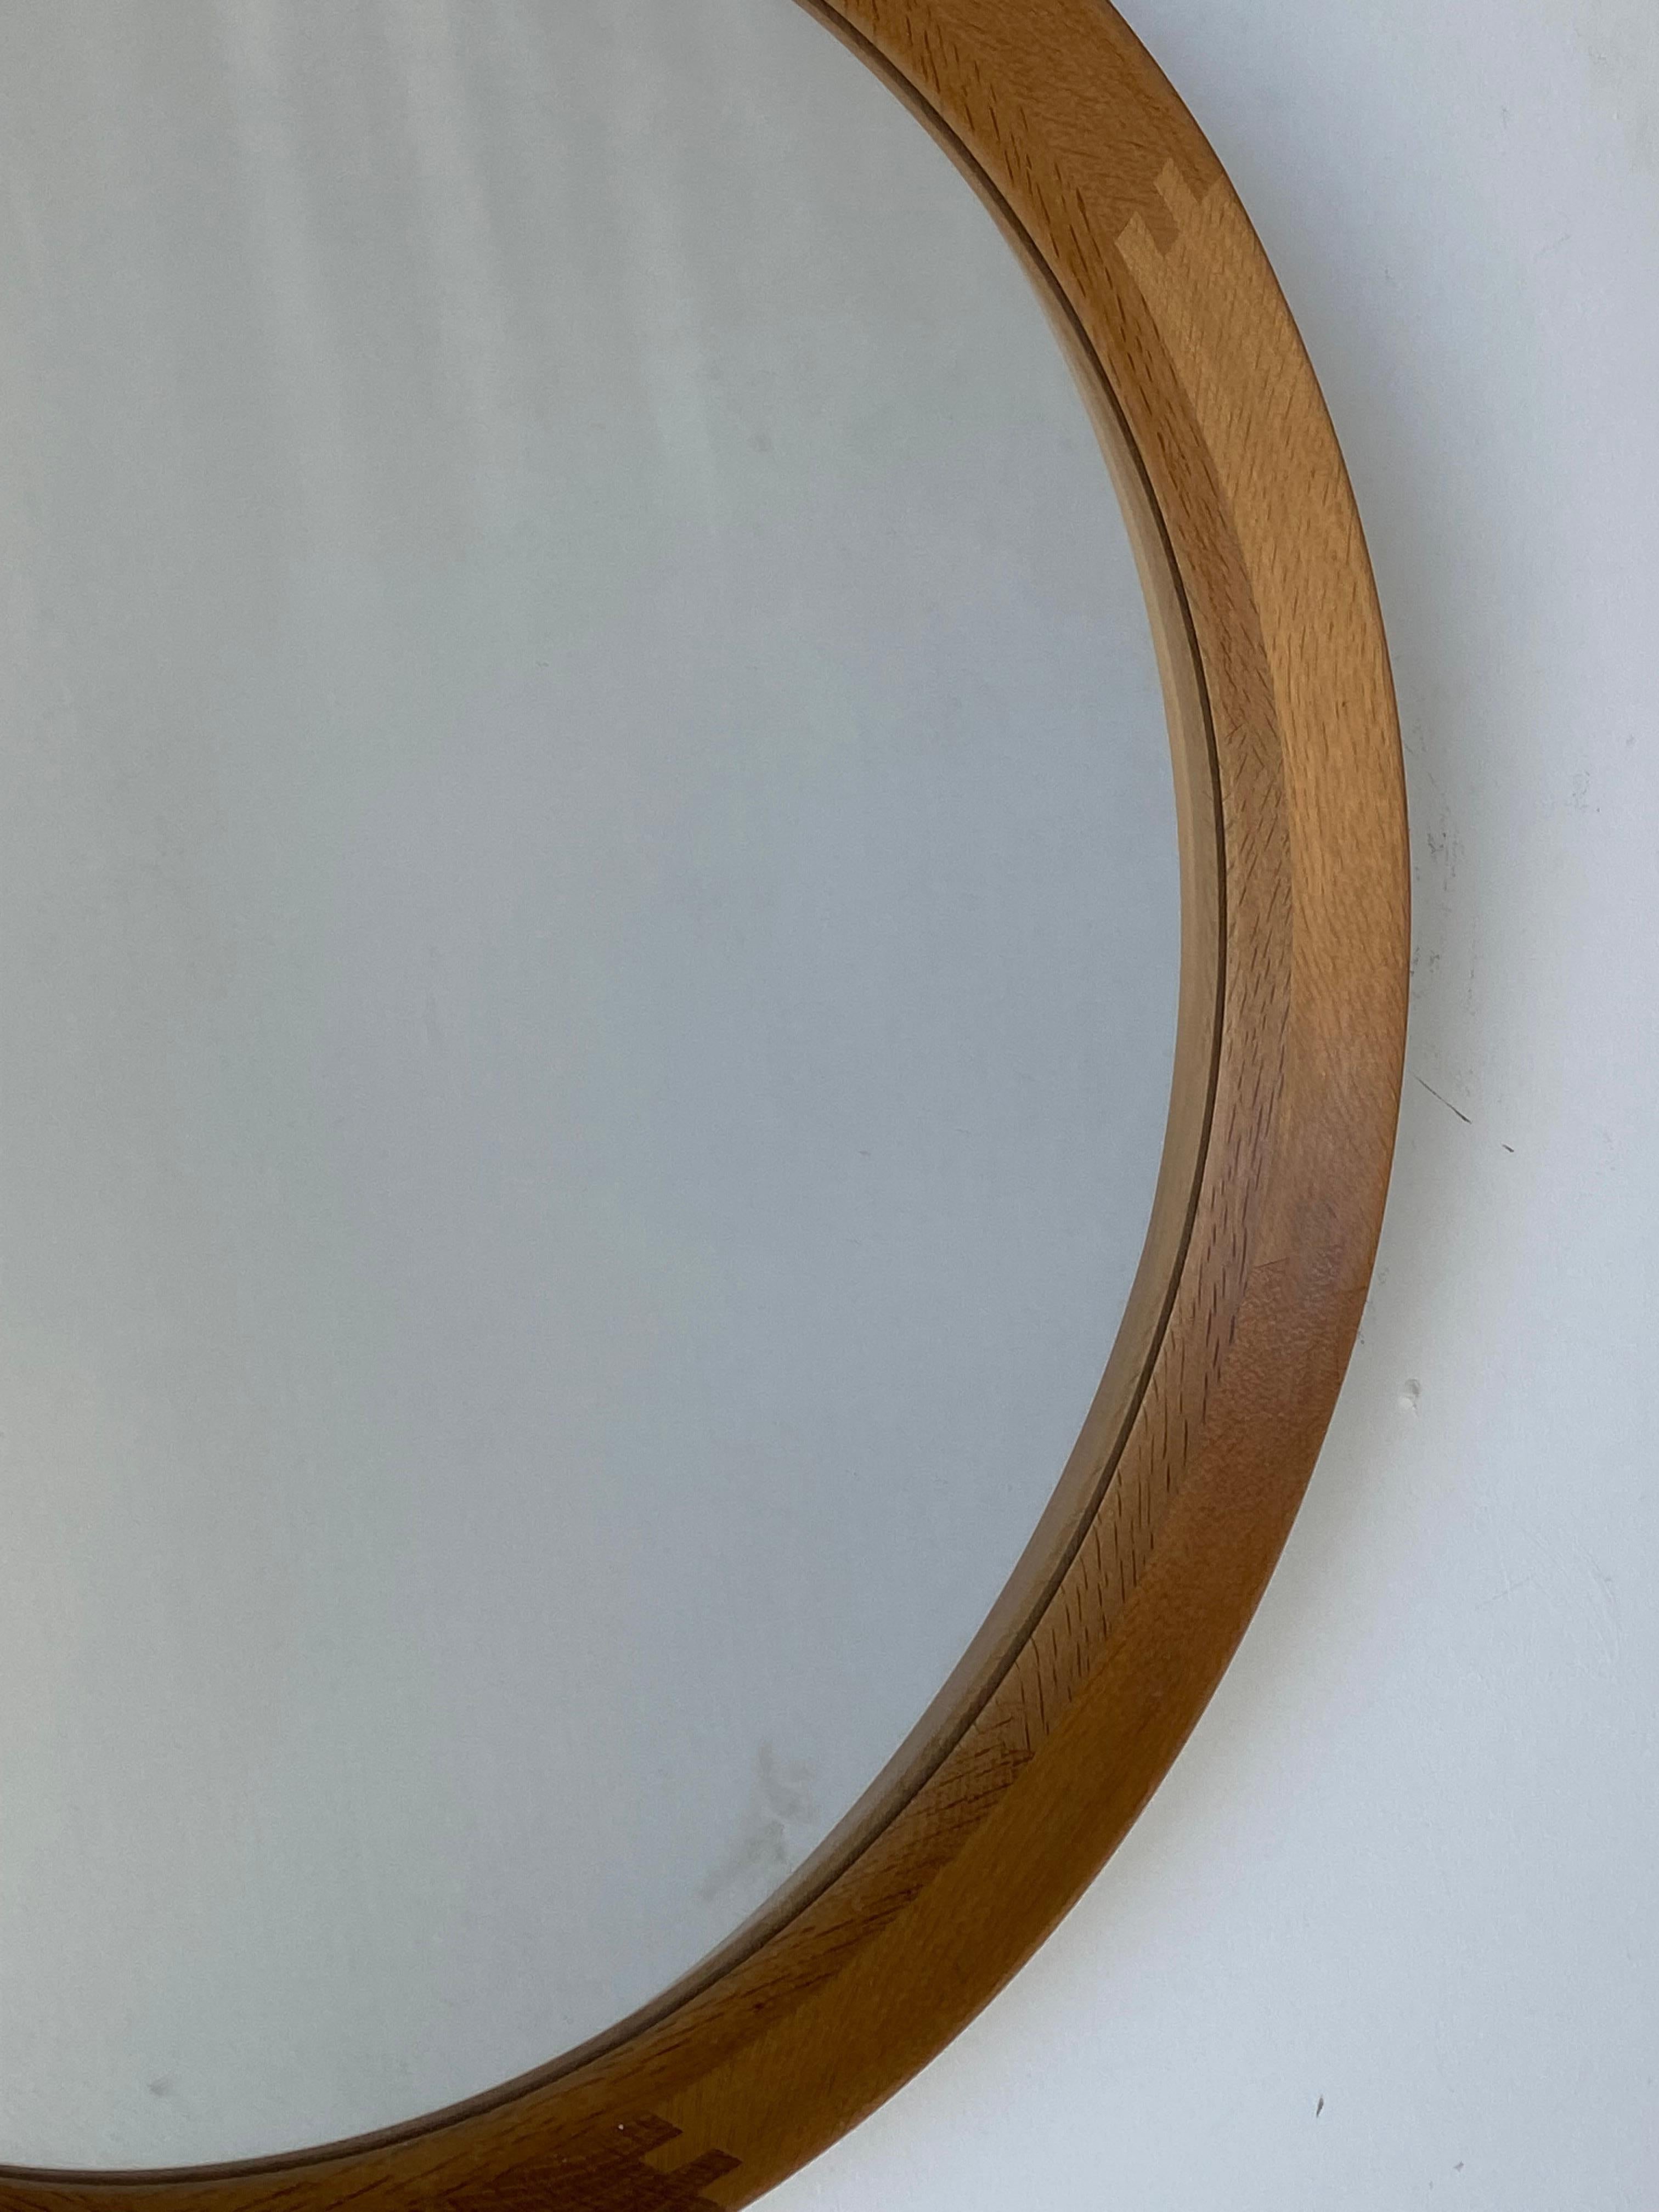 A stained oak mirror, glass with a finely sculpted solid oak frame wrapping the glass in a round form. 

Other designers of the period include Hans Wegner, Josef Frank, Finn Juhl, George Nakashima and Arne Jacobsen.